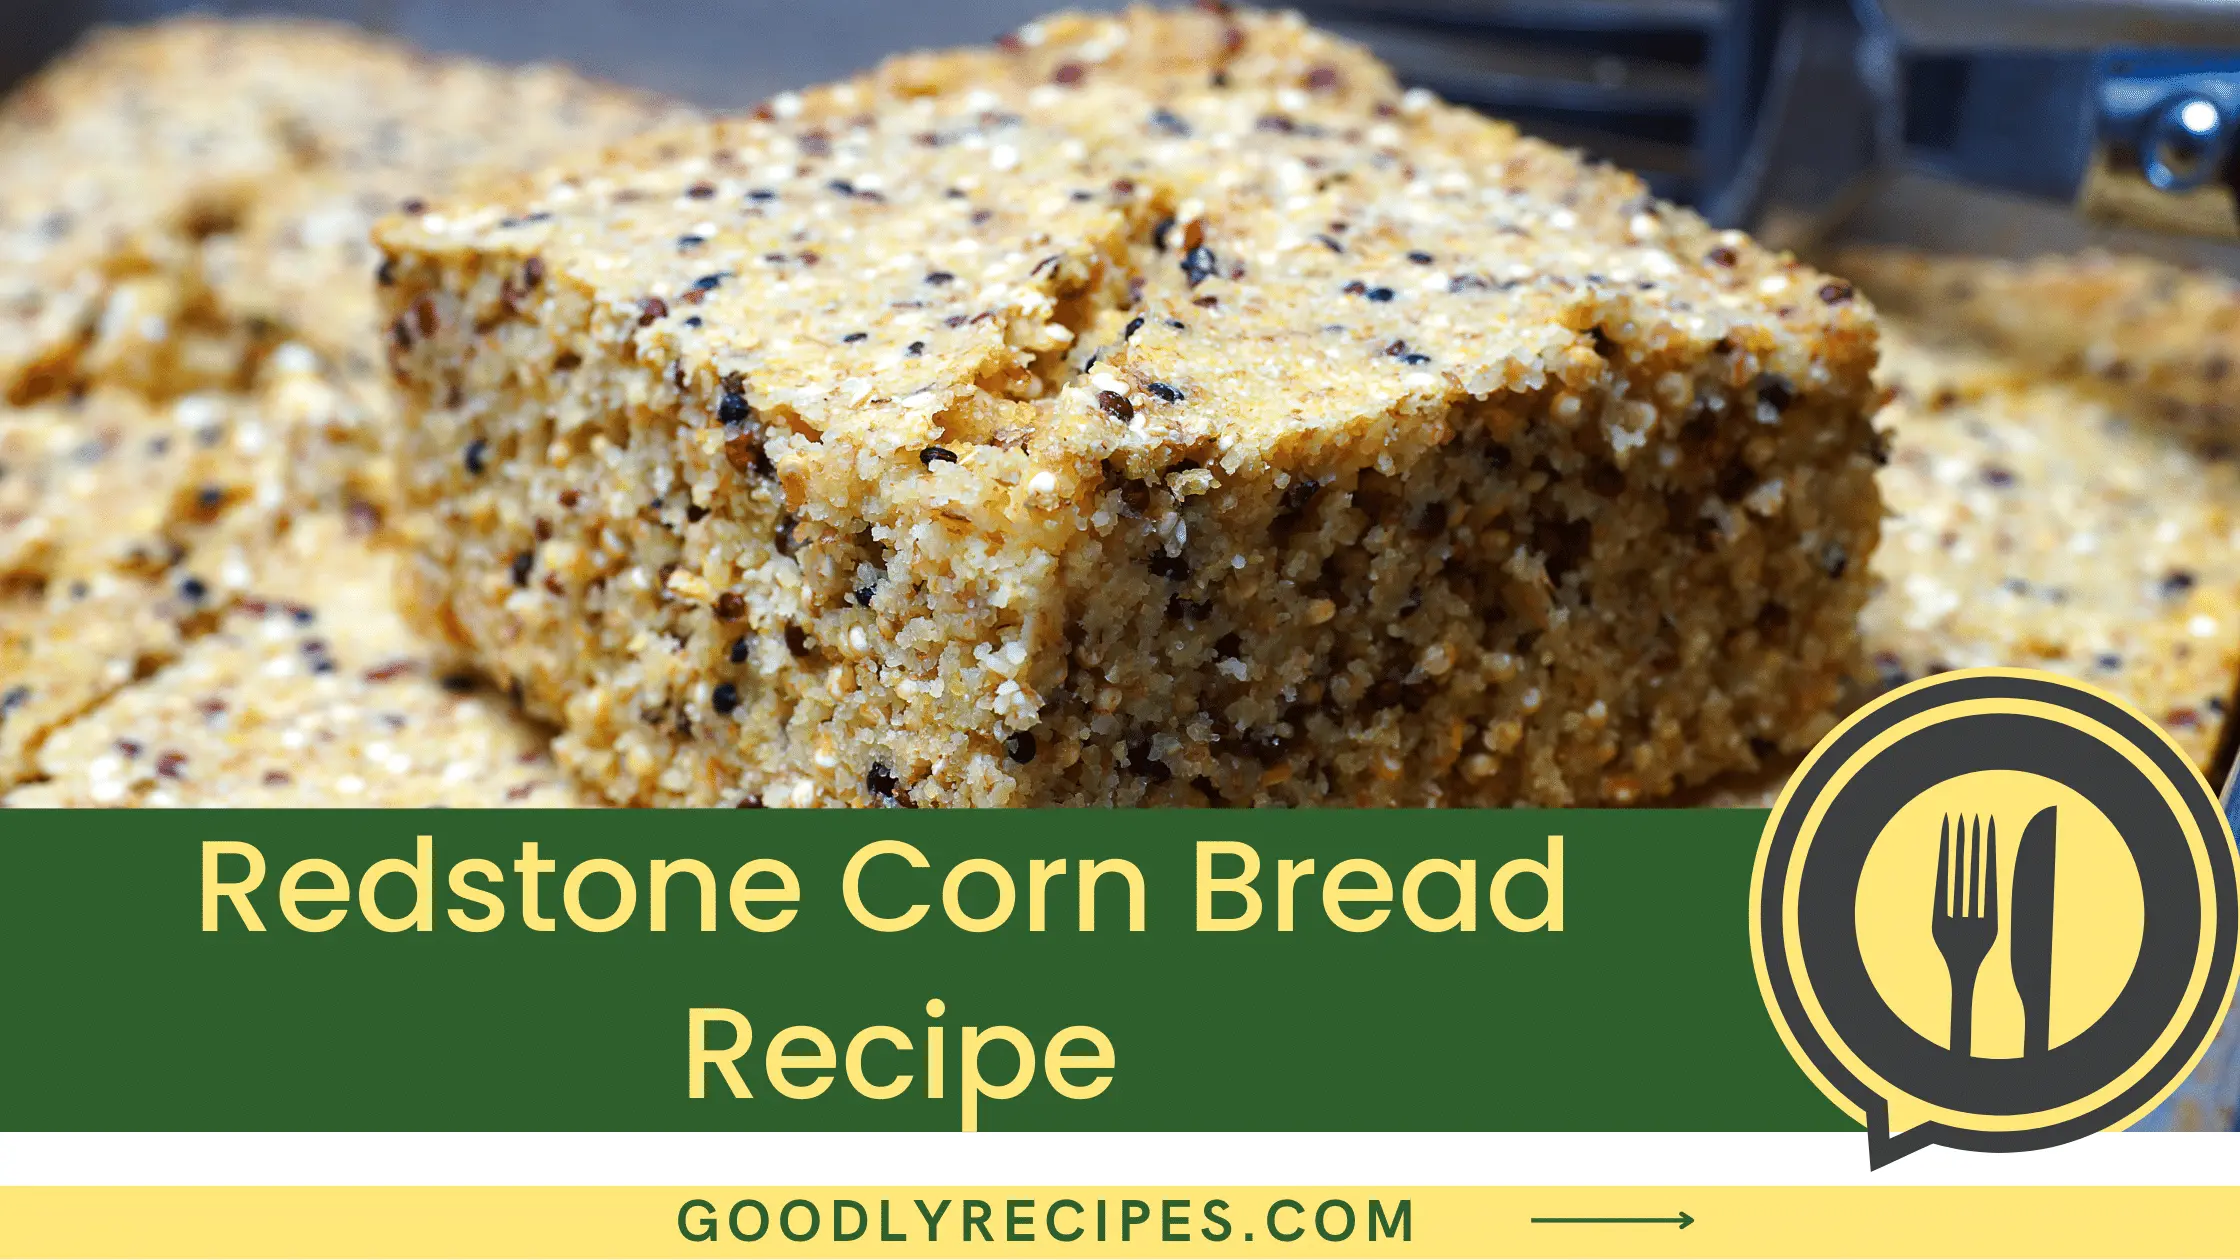 What is Redstone Corn Bread?